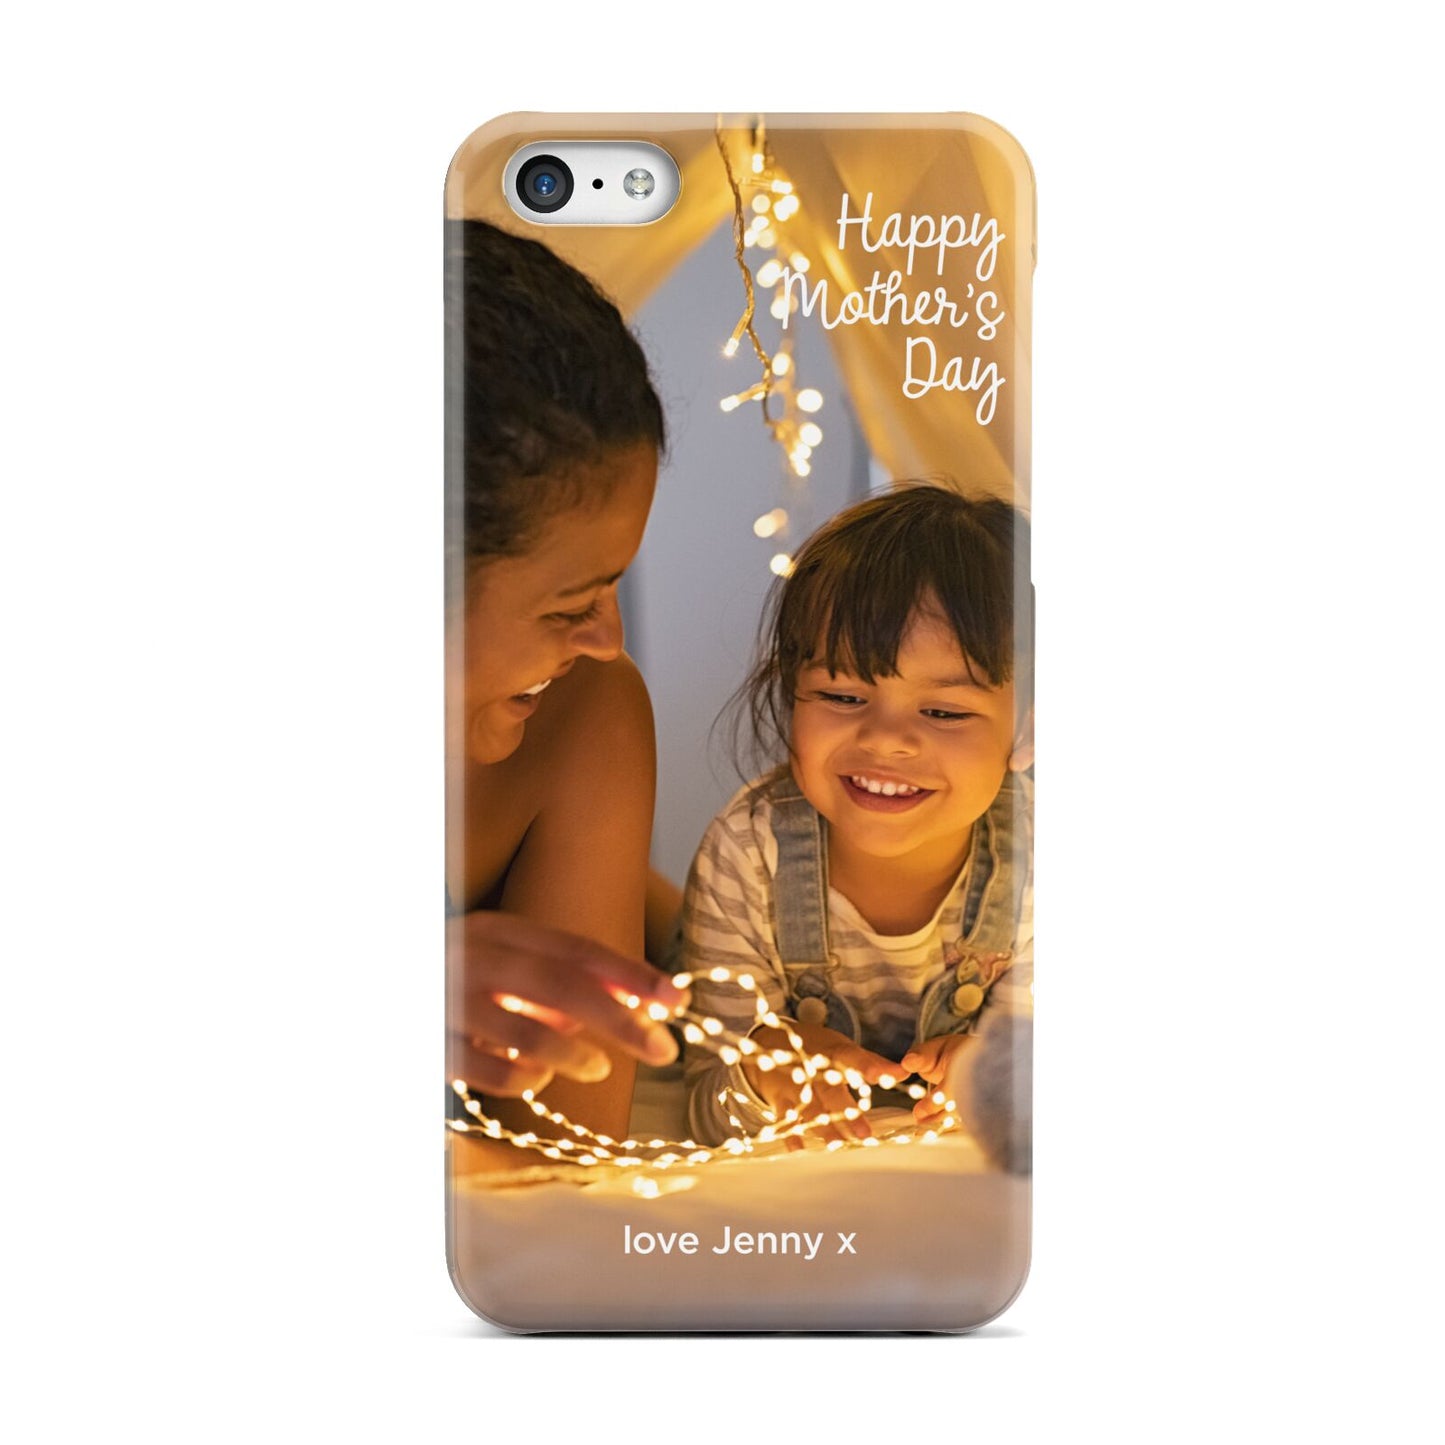 Large Mothers Day Photo with Name Apple iPhone 5c Case